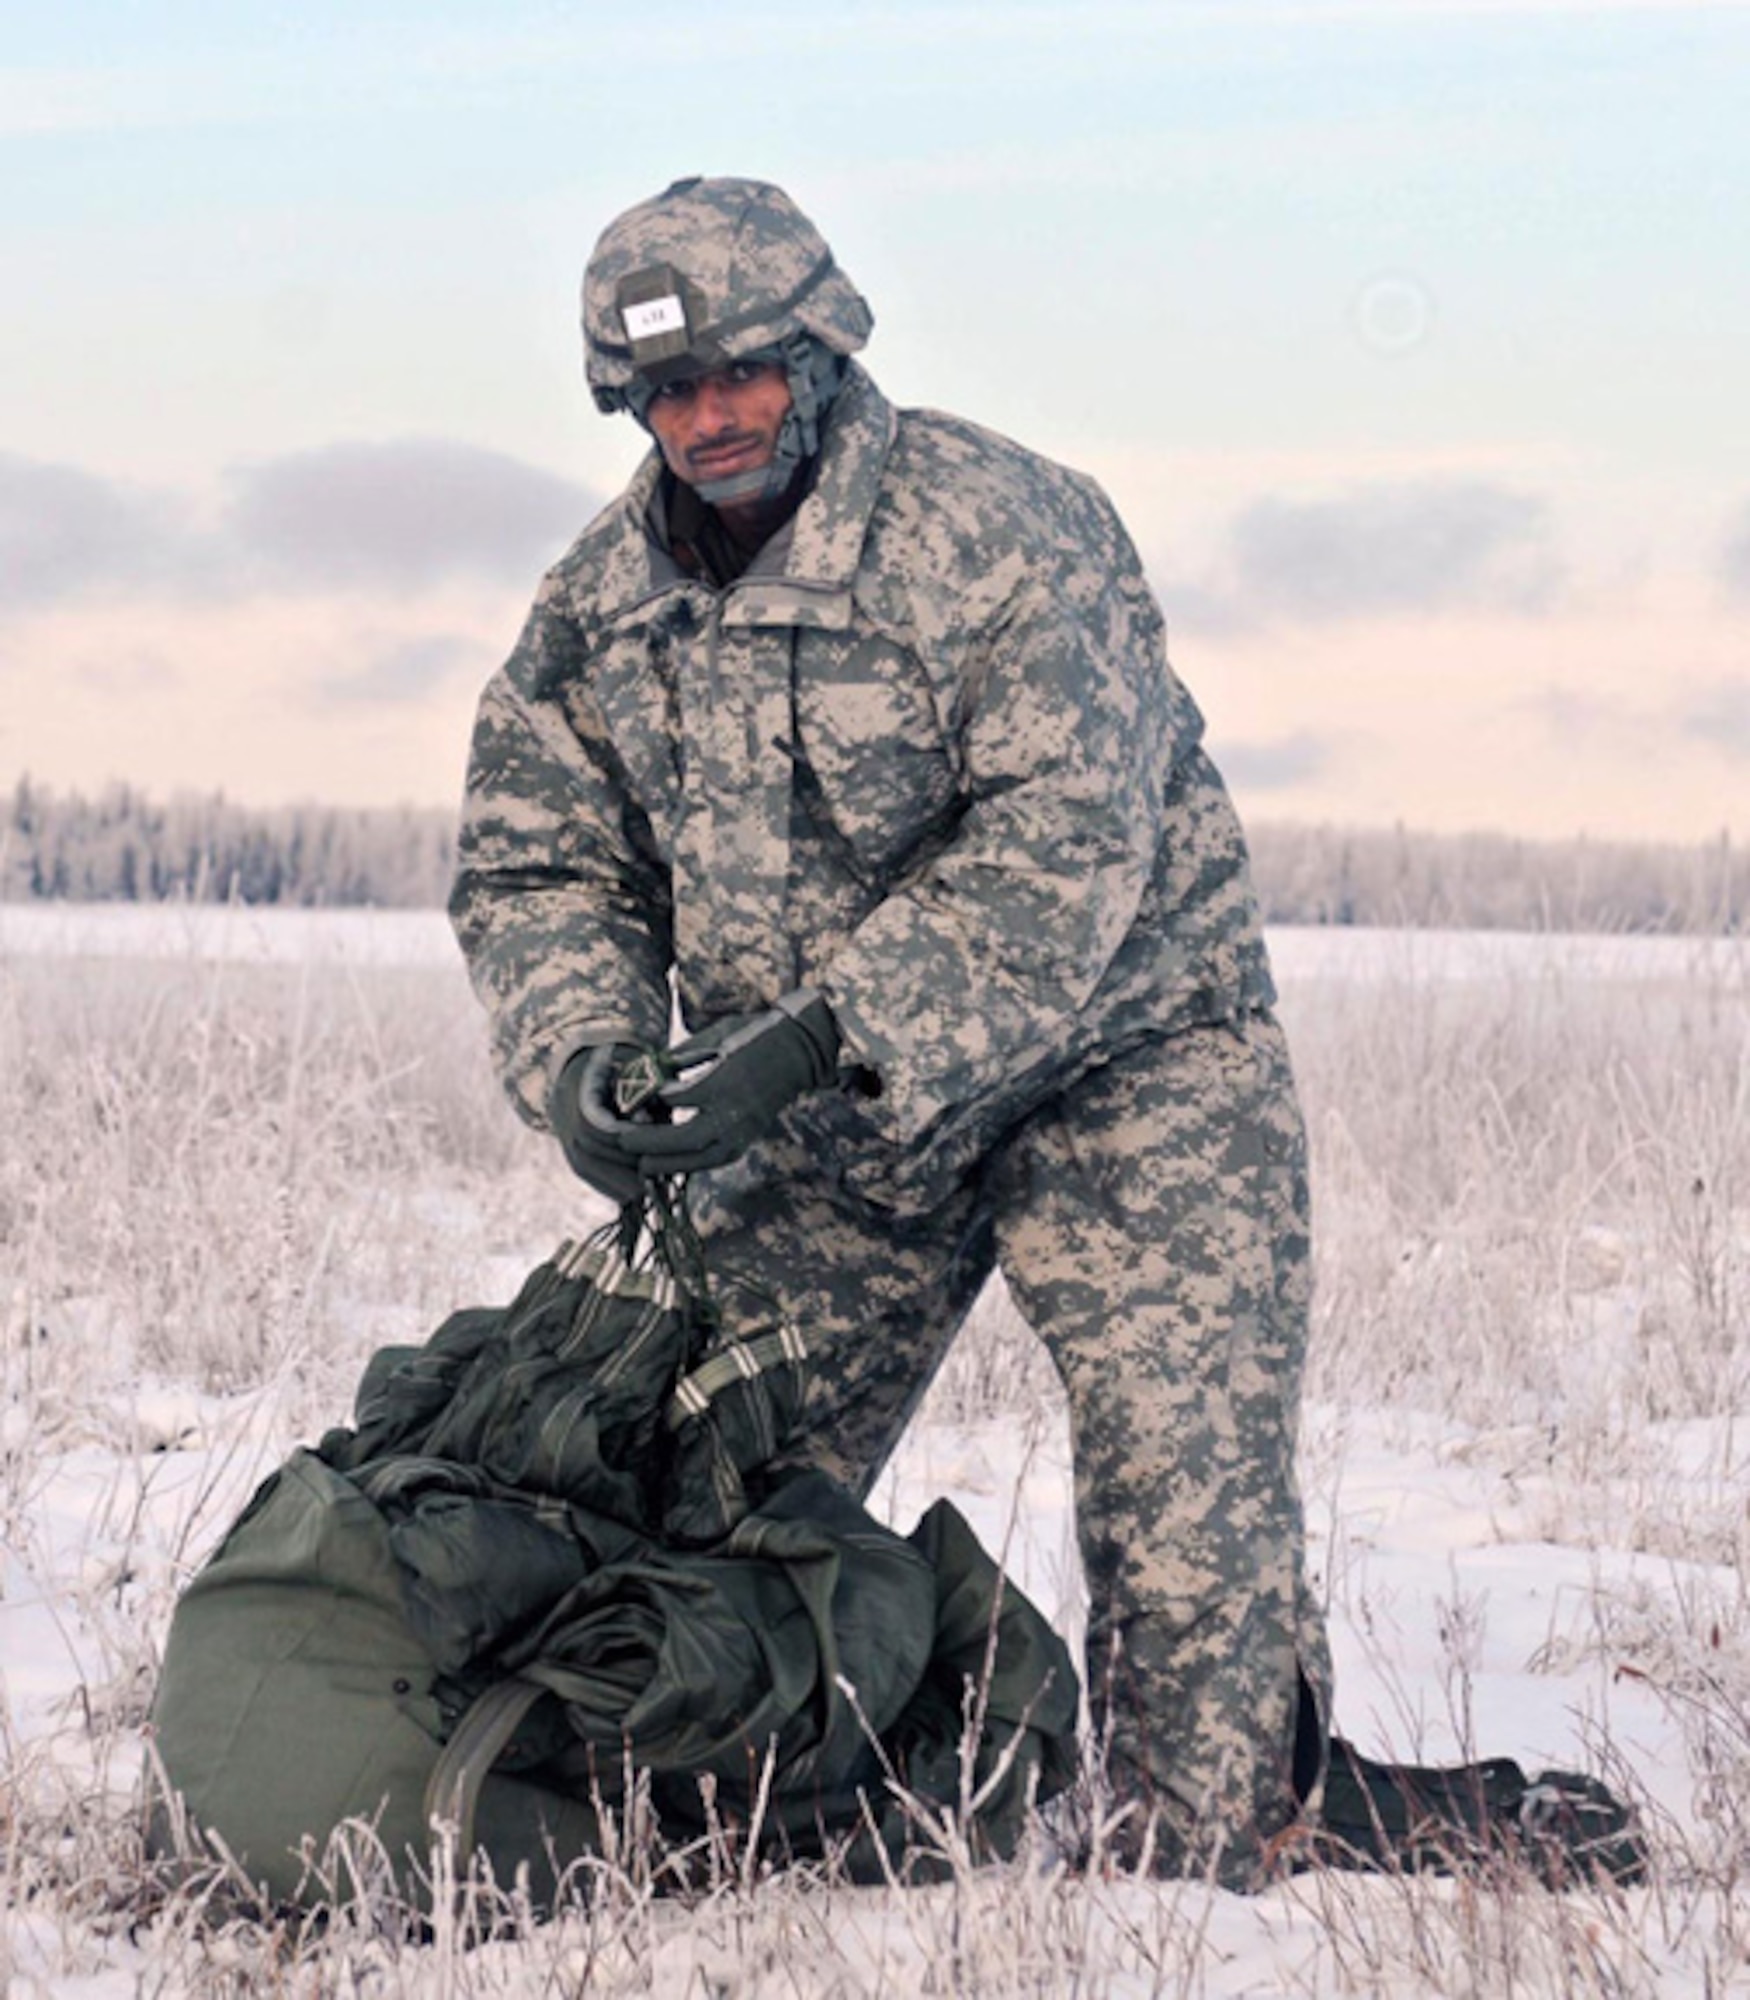 An Indian army soldier packs up his parachute and looks for the turn in point at Malamute drop zone on Joint Base Elmendorf-Richardson after an airborne jump, Nov. 10. About 400 soldiers from U.S. Army Alaska and the Indian army during the combined training exercise Yudh Abhyas 2010. (U.S. Army photo/Spc. Ashley Armstrong)